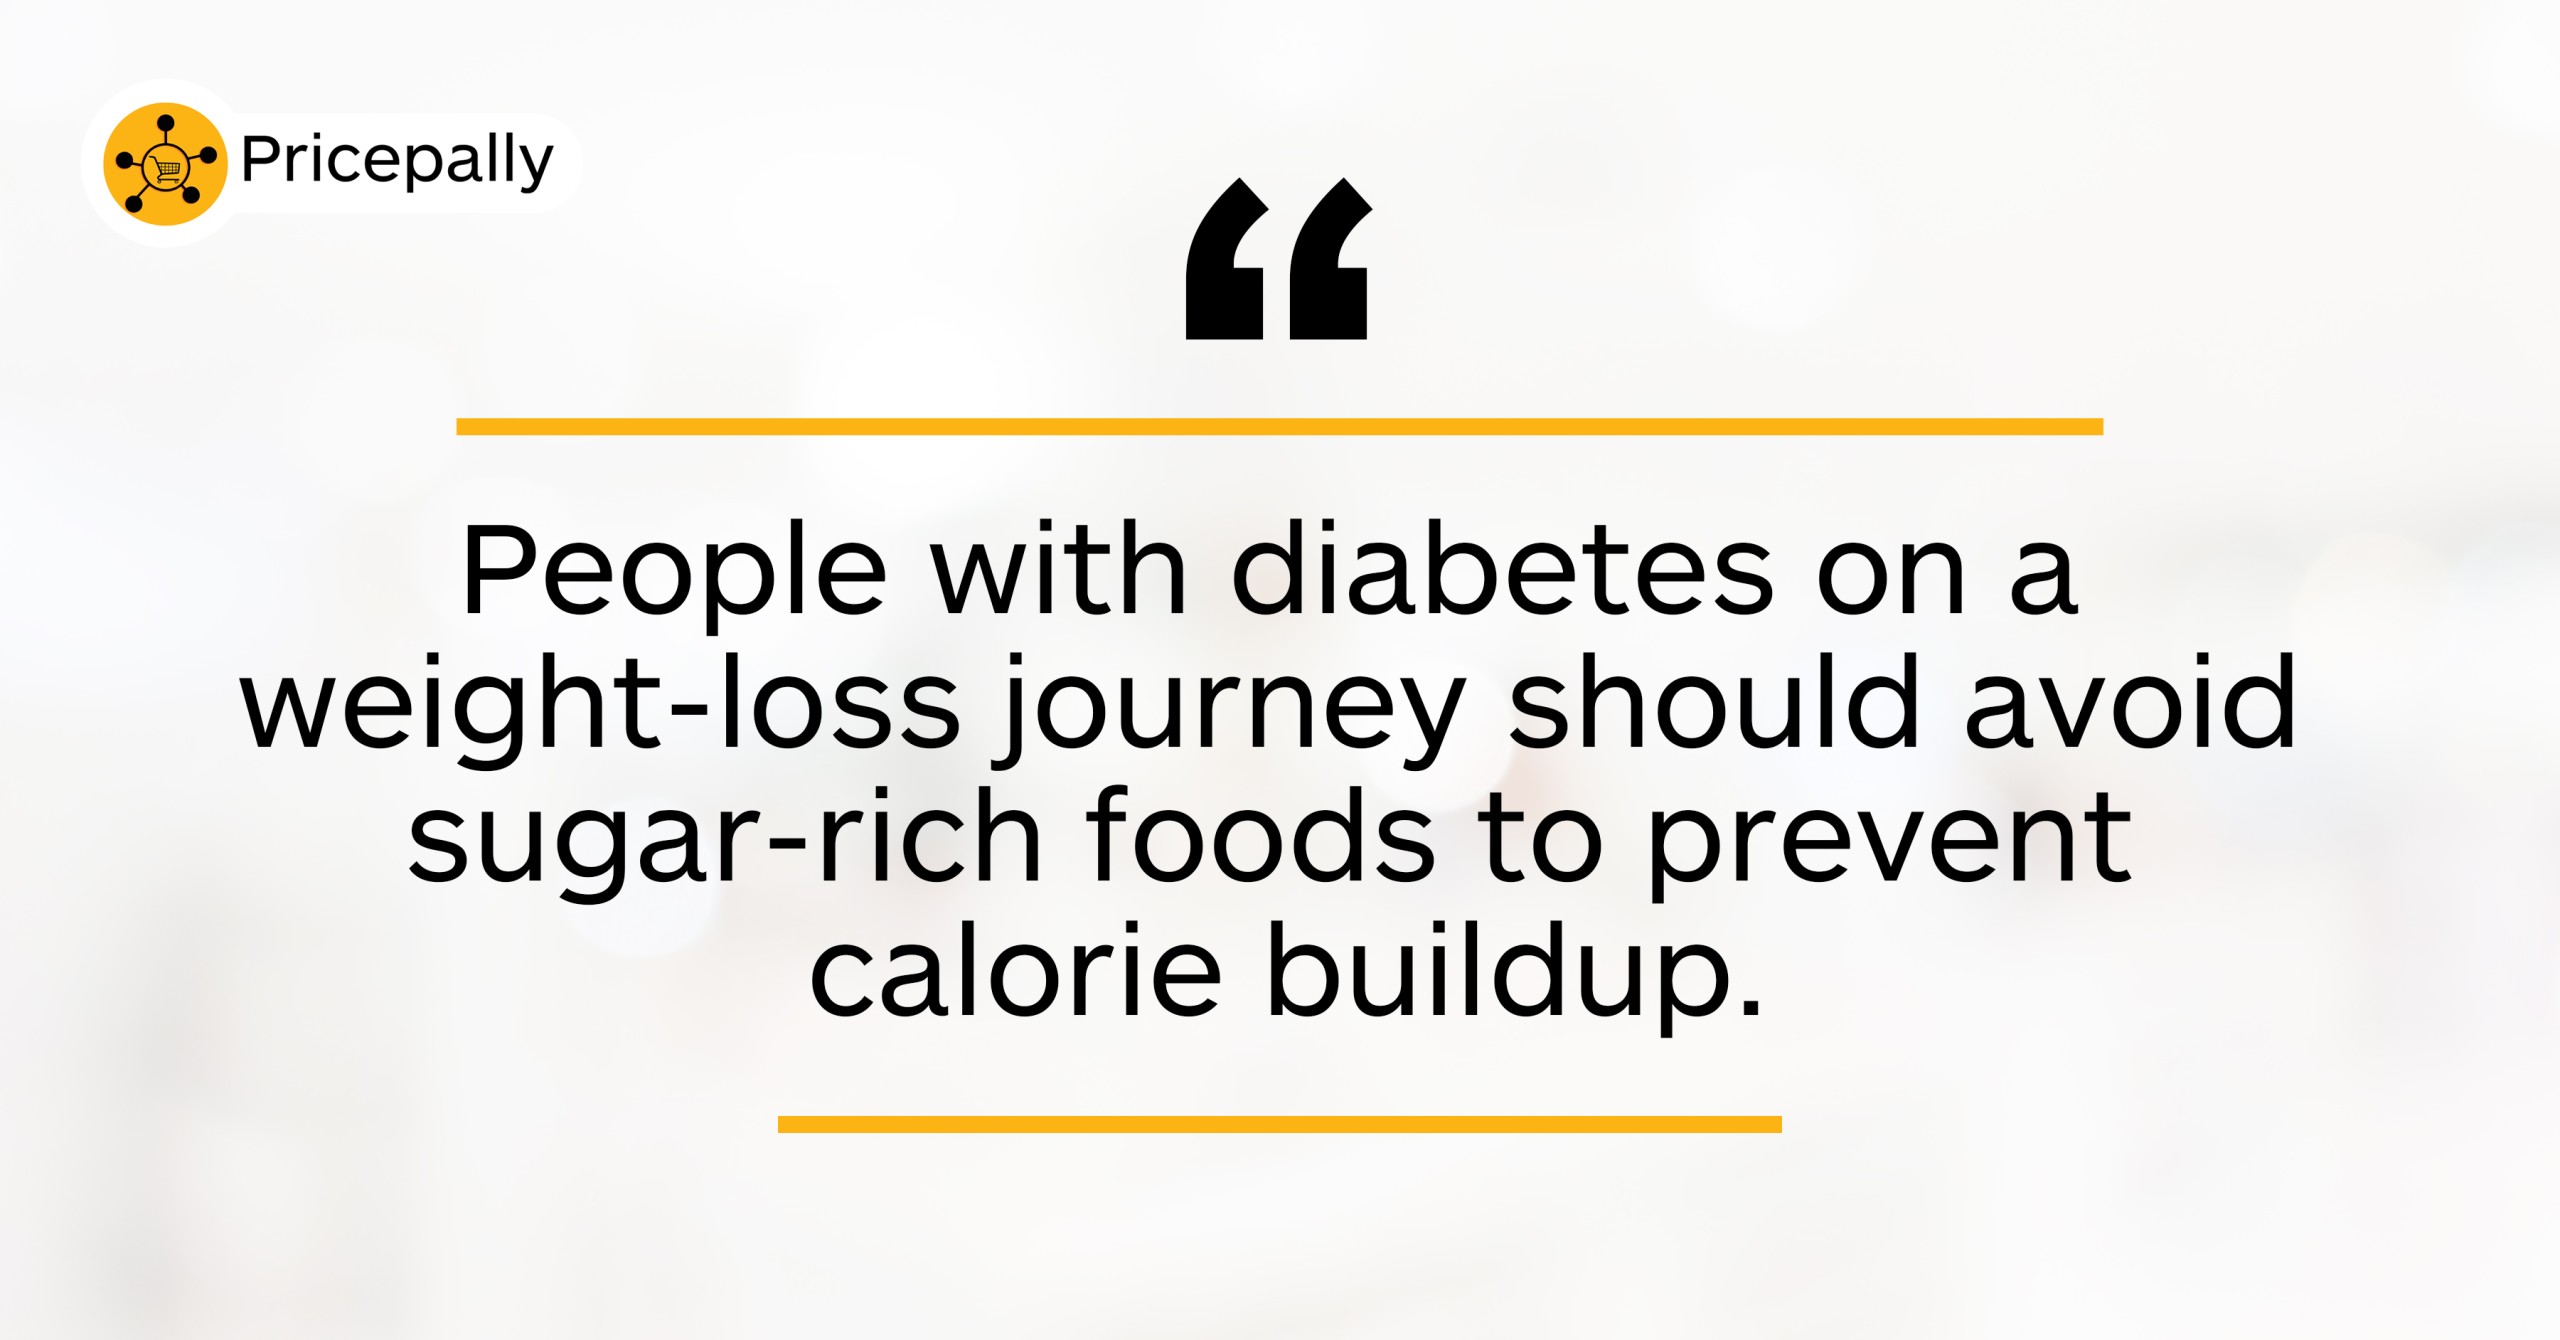 A quote about workout nutrition for diabetics: "People with diabetes on a weight-loss journey should avoid sugar-rich foods to prevent calorie buildup."